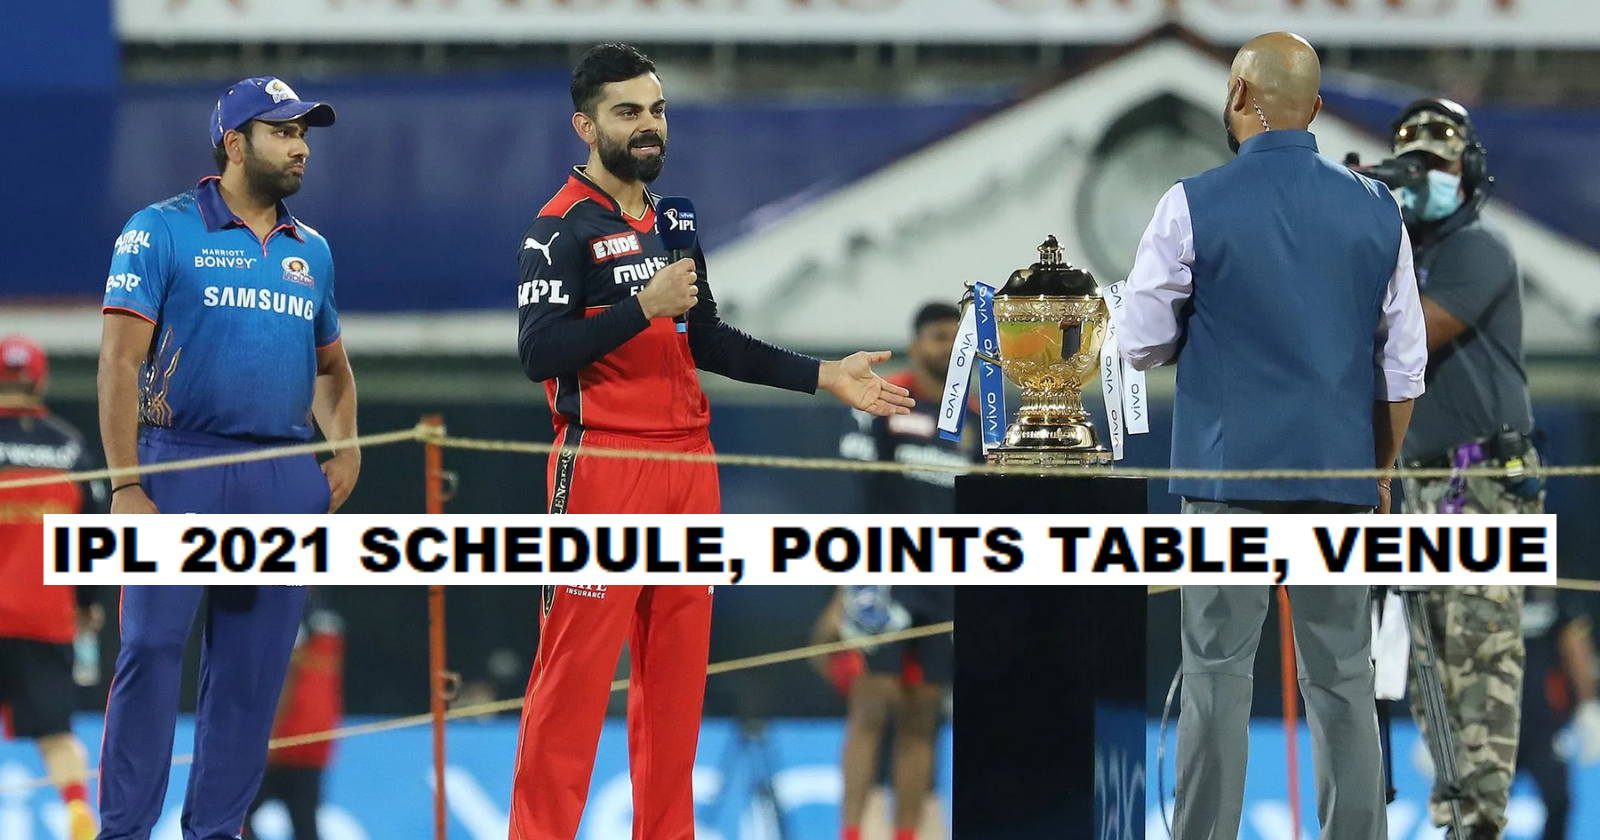 IPL 2021 Schedule, Points Table, Date, Match List, Orange Cap, Venue, Team List, And All You Need To Know